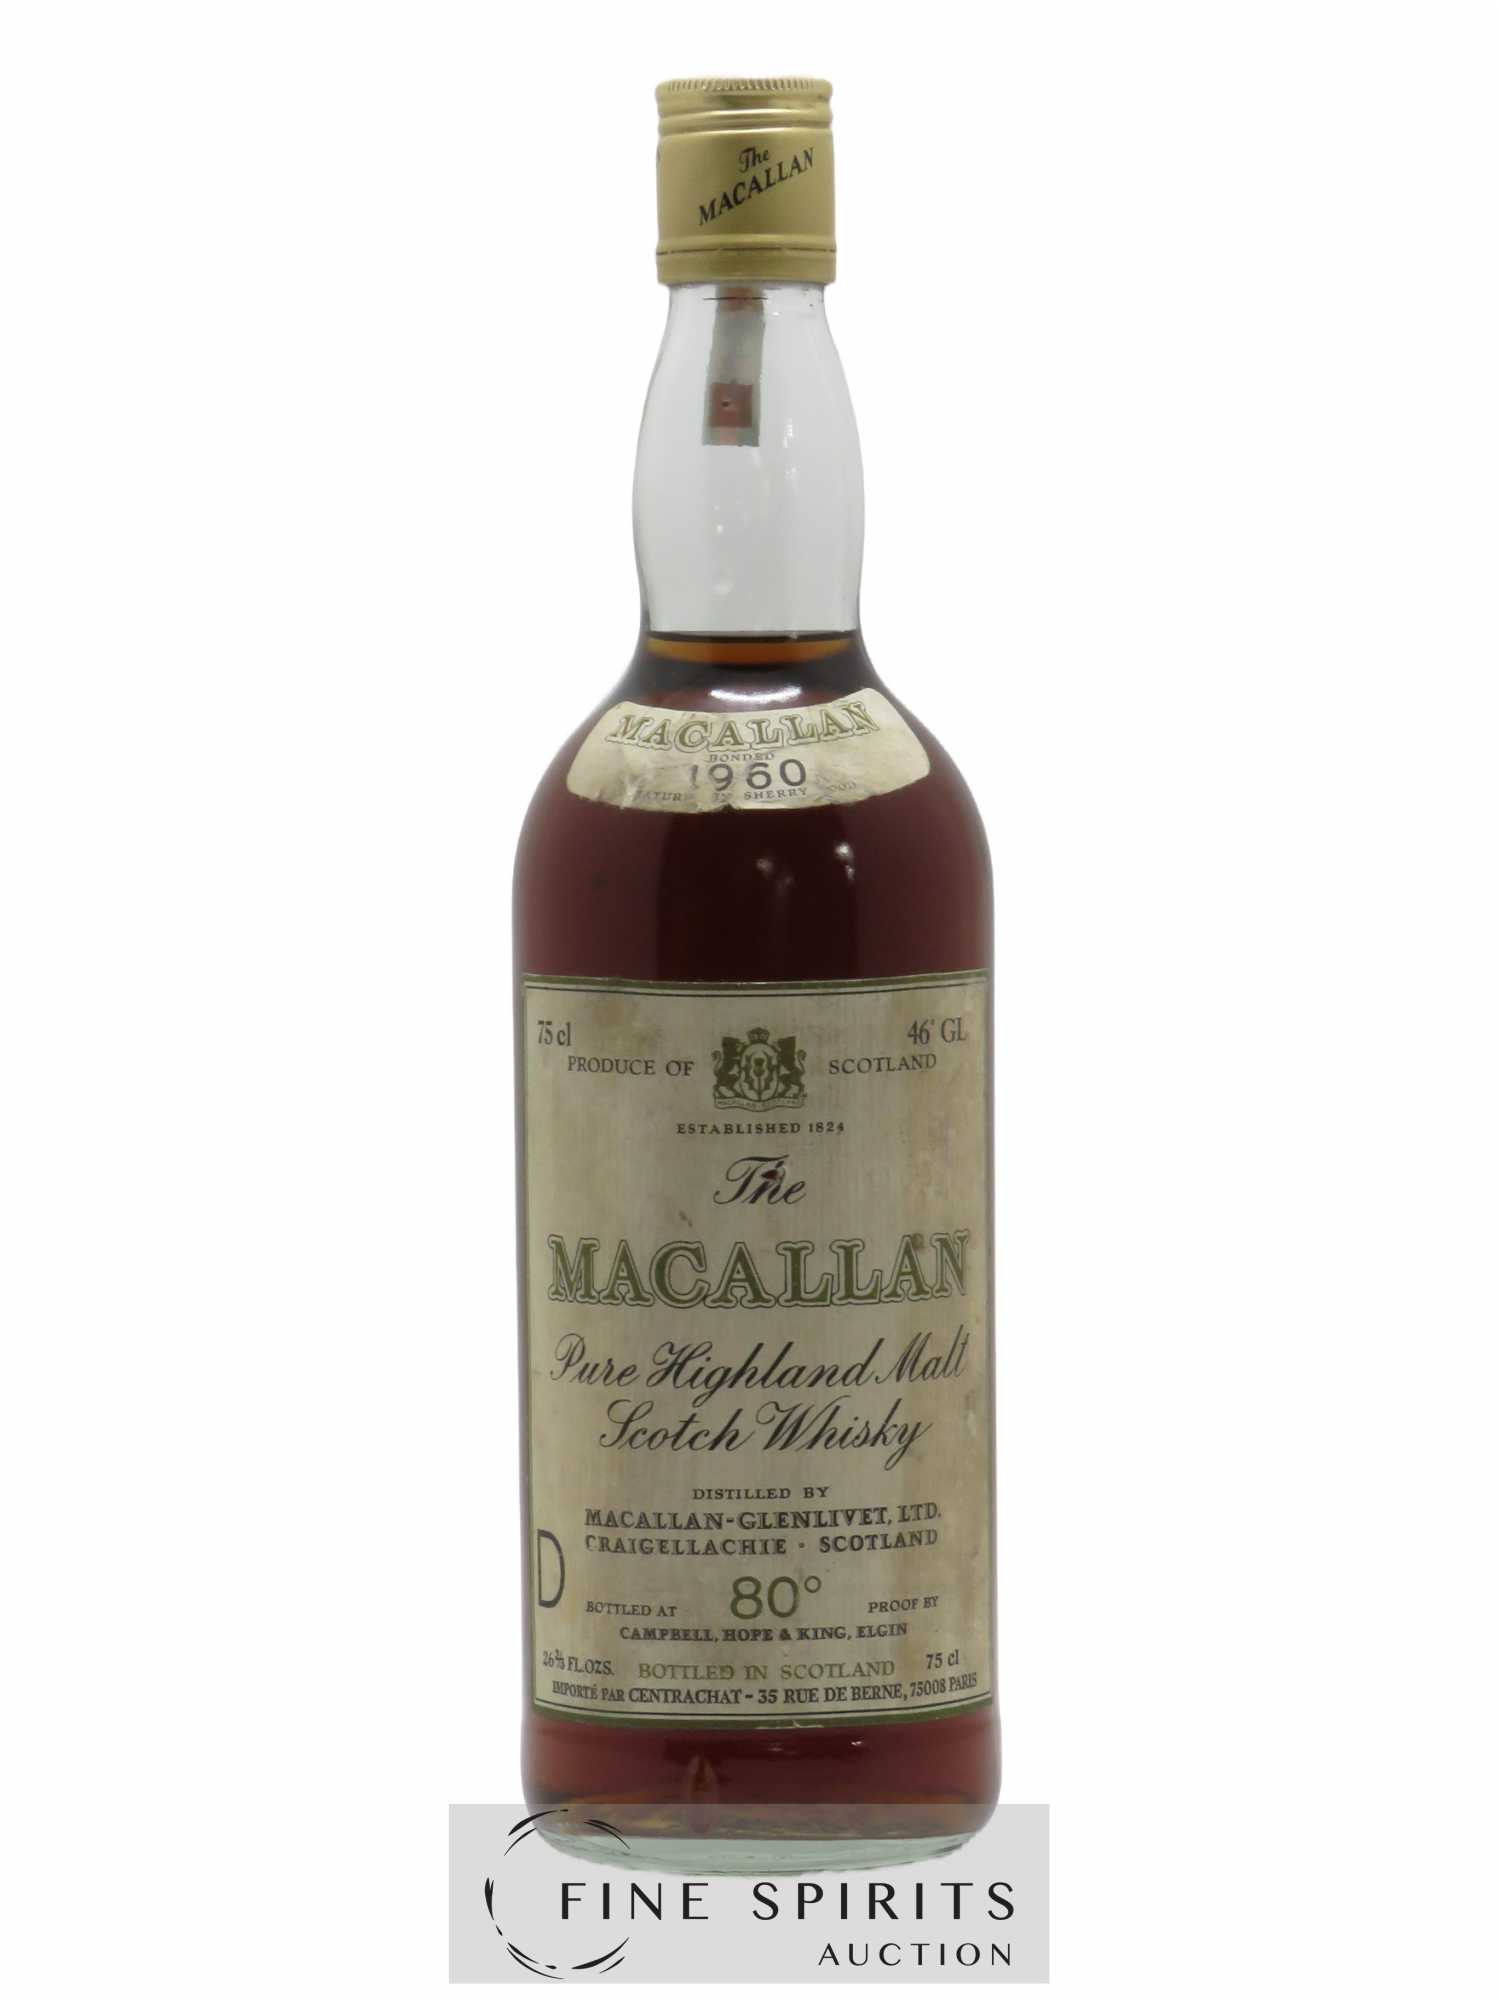 Macallan (The) 1960 Campbell, Hope and King, Elgin Sherry Wood Matured Import by Centrachat, Paris bottled at 80° Proof